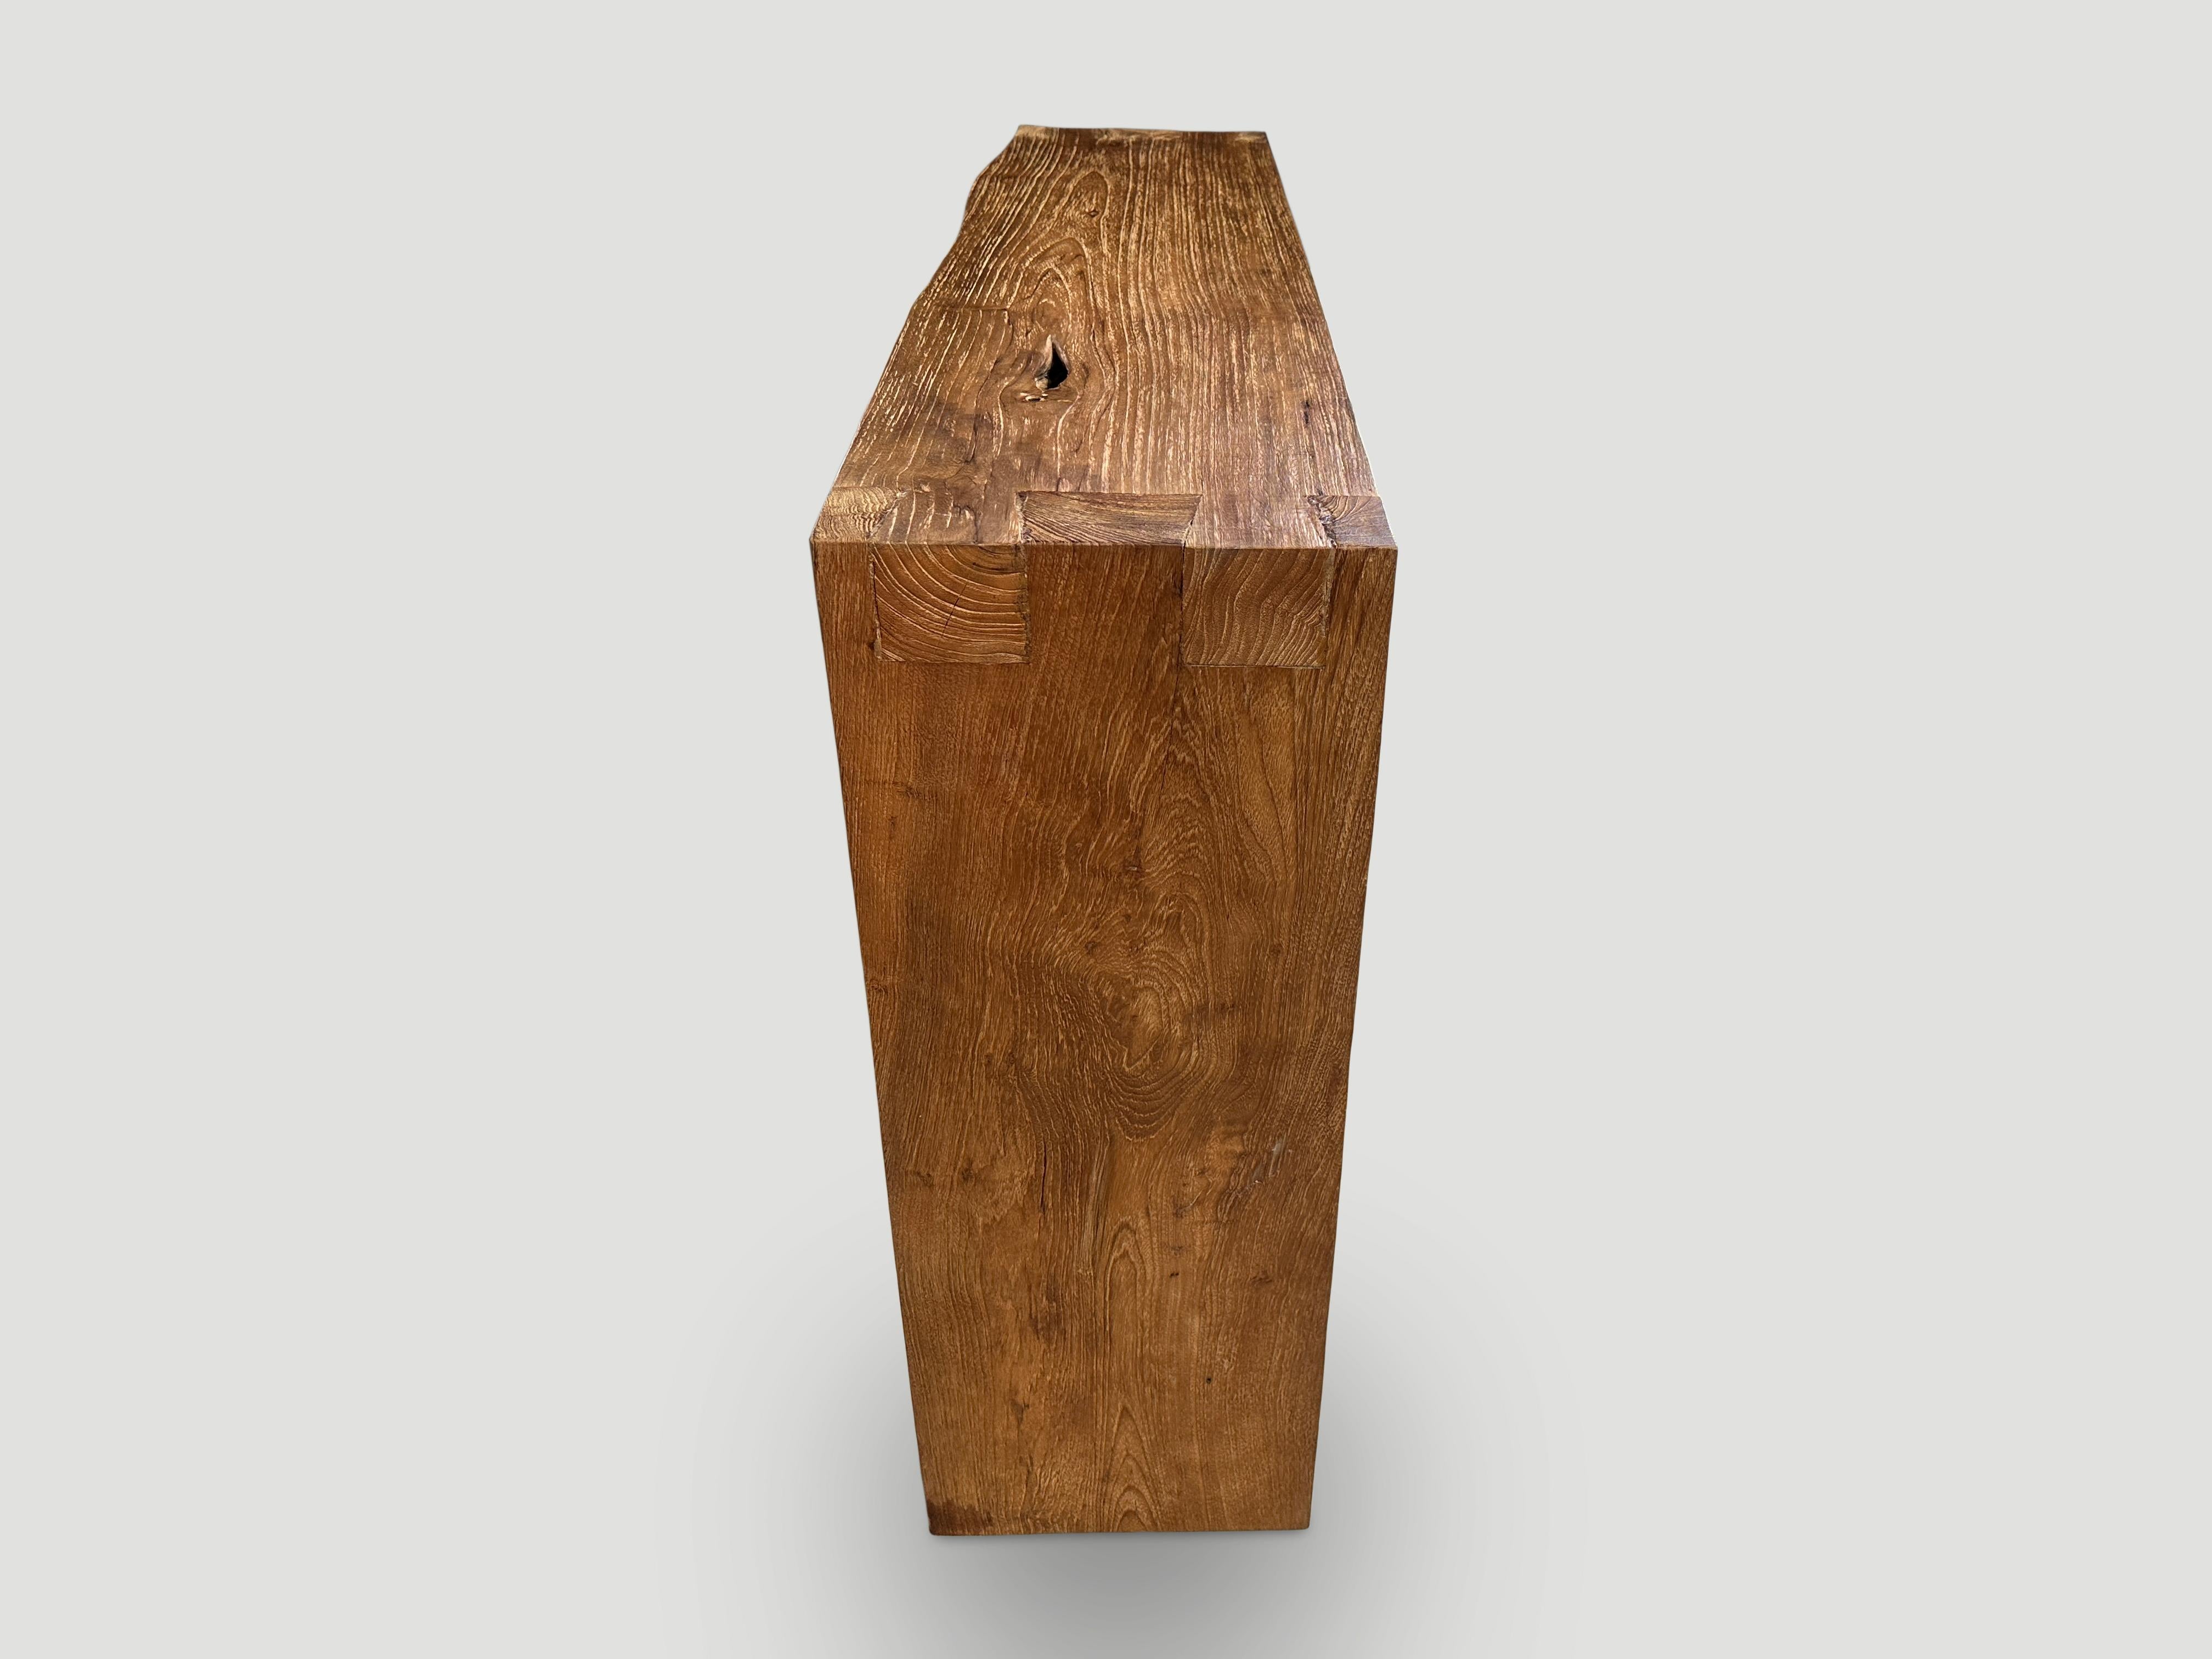 Impressive three inch thick minimalist console table hand made from reclaimed teak wood. One side is straight and the other side has a light live edge. Finished in a natural oil revealing the beautiful wood grain. Custom stains and sizes